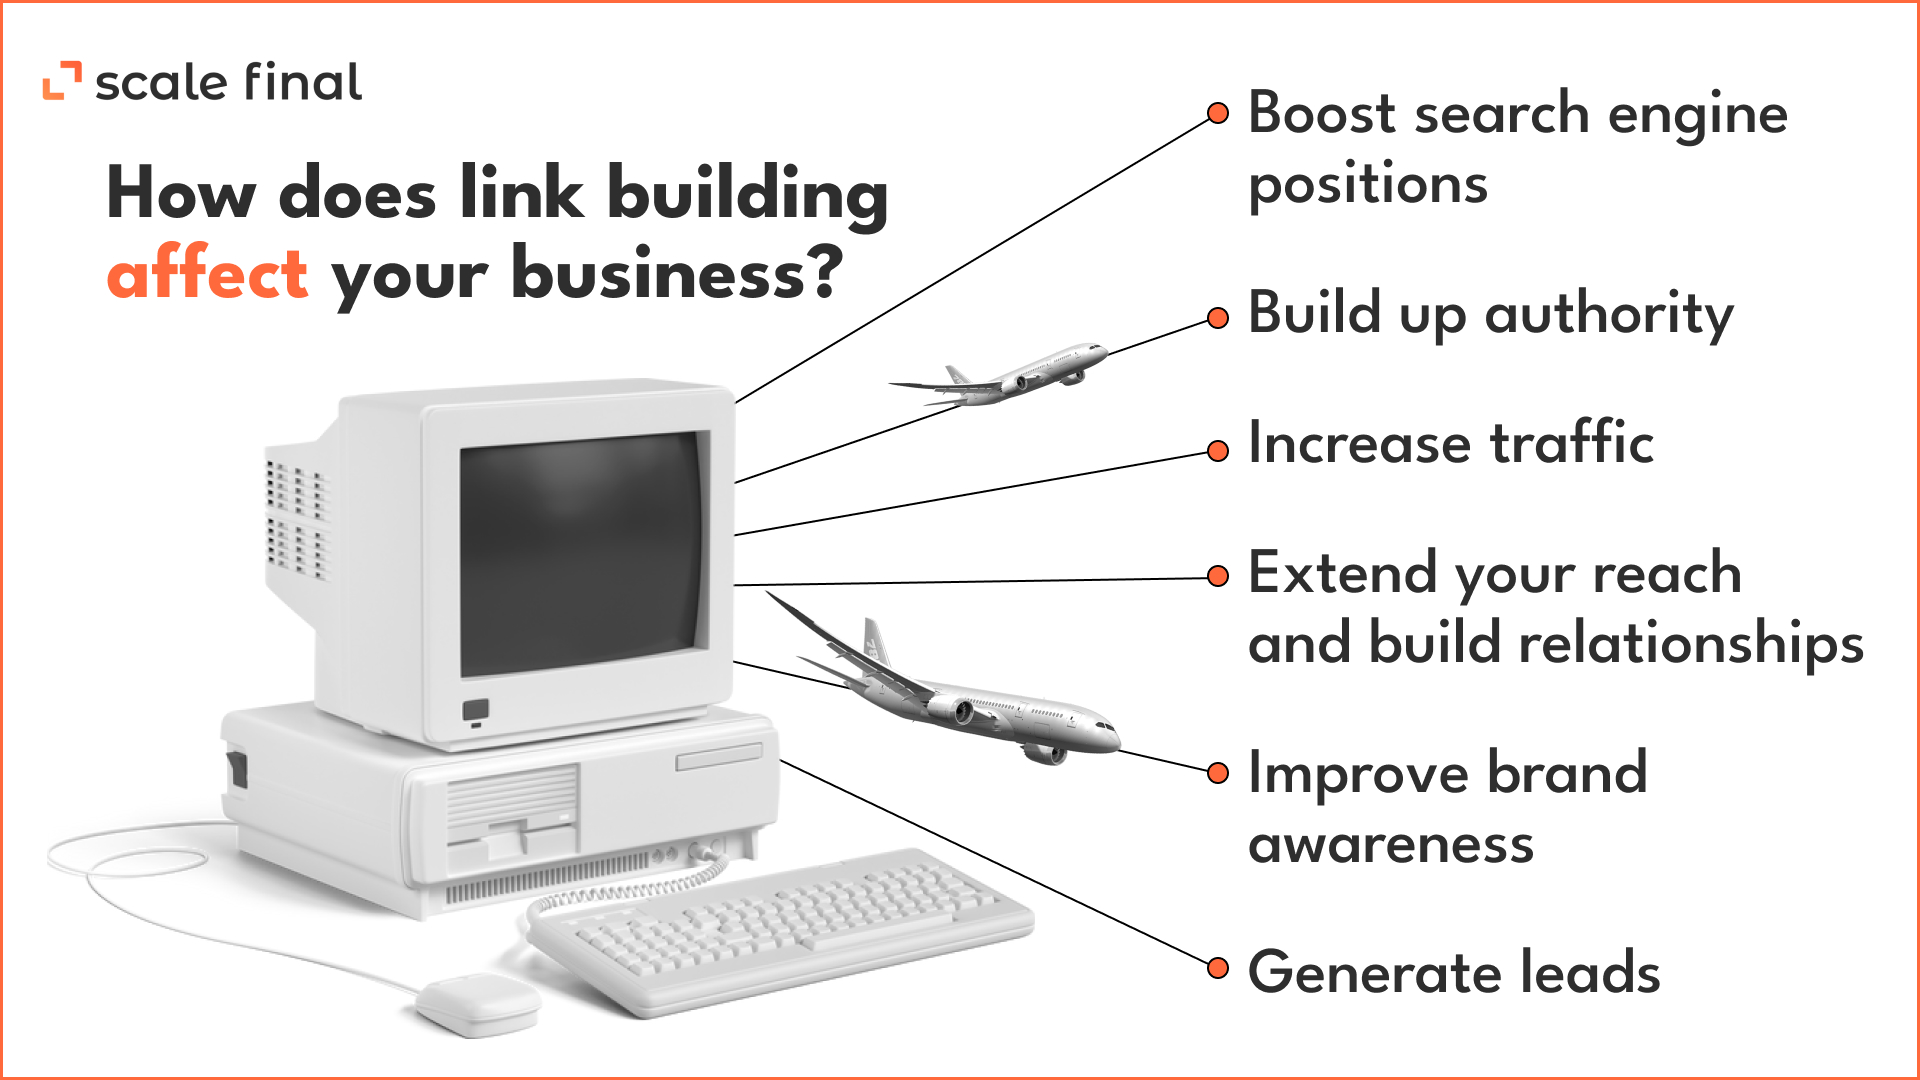 How does link building affect your business?Boost search engine positionsBuild up authorityIncrease trafficExtend your reach and build relationshipsImprove brand awarenessGenerate leads